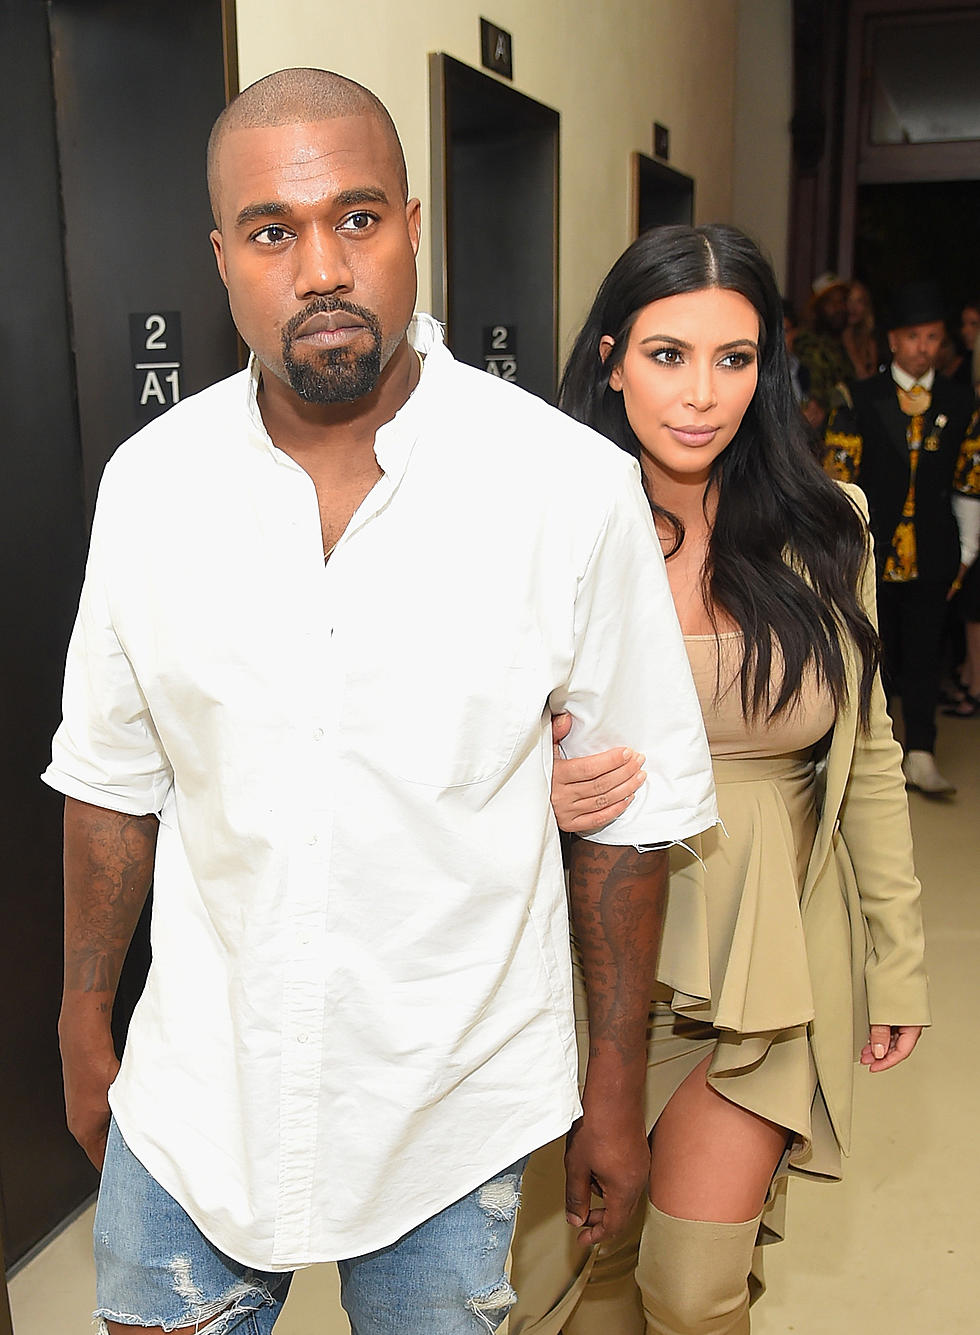 Does Kim Kardashian Want a Divorce from Kanye West?